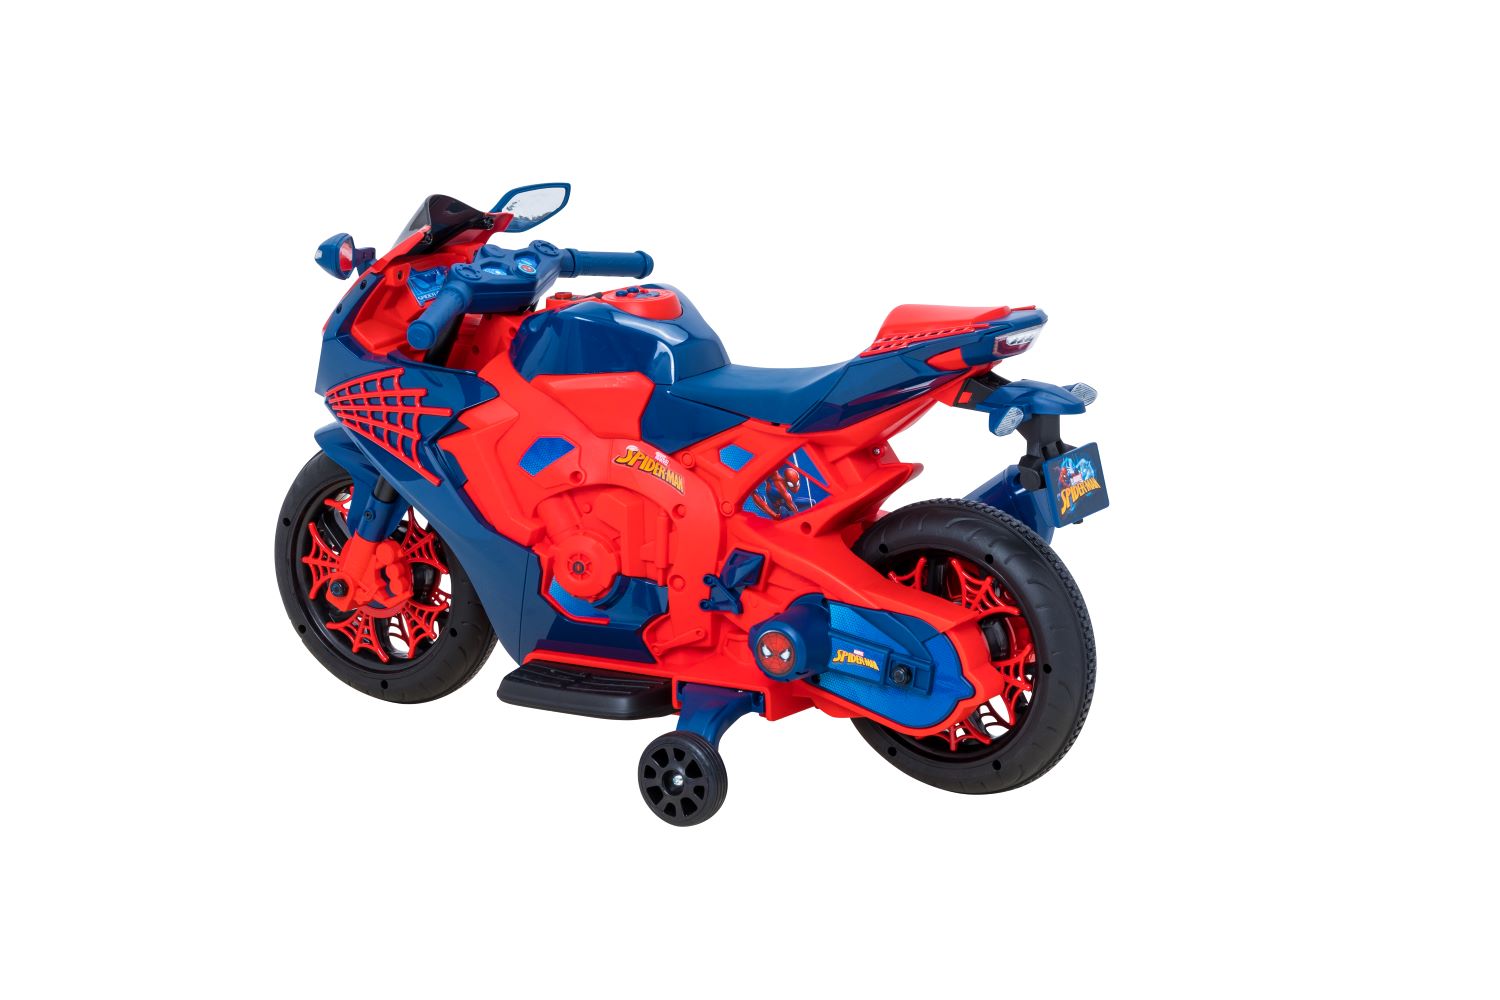 Spiderman 6V Motorcycle Ride On, for Kids, Ages 3+, Rechargeable Battery,  up to 65lbs